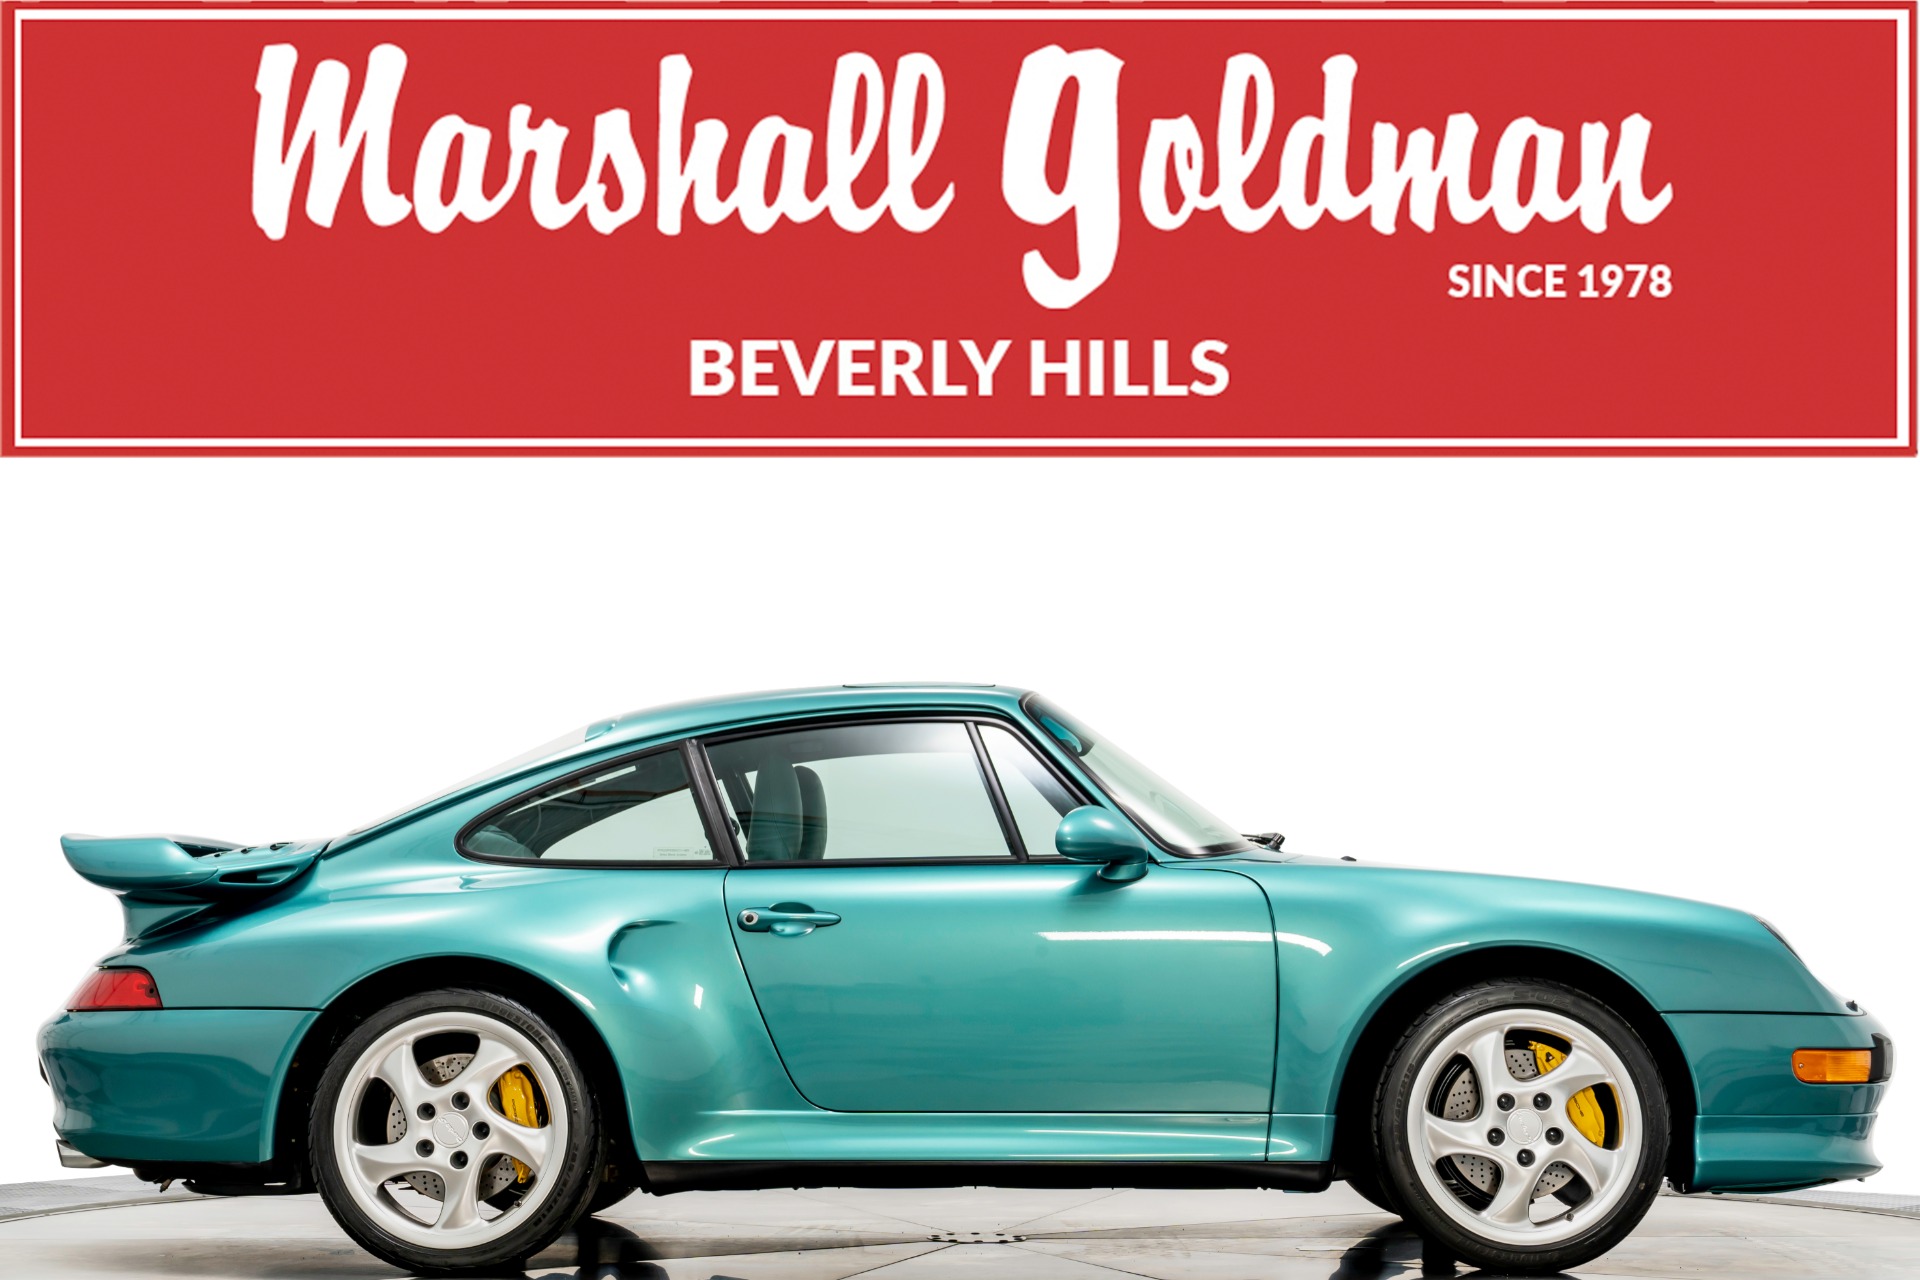 Used 1997 Porsche 911 Turbo S For Sale (Sold) | Marshall Goldman